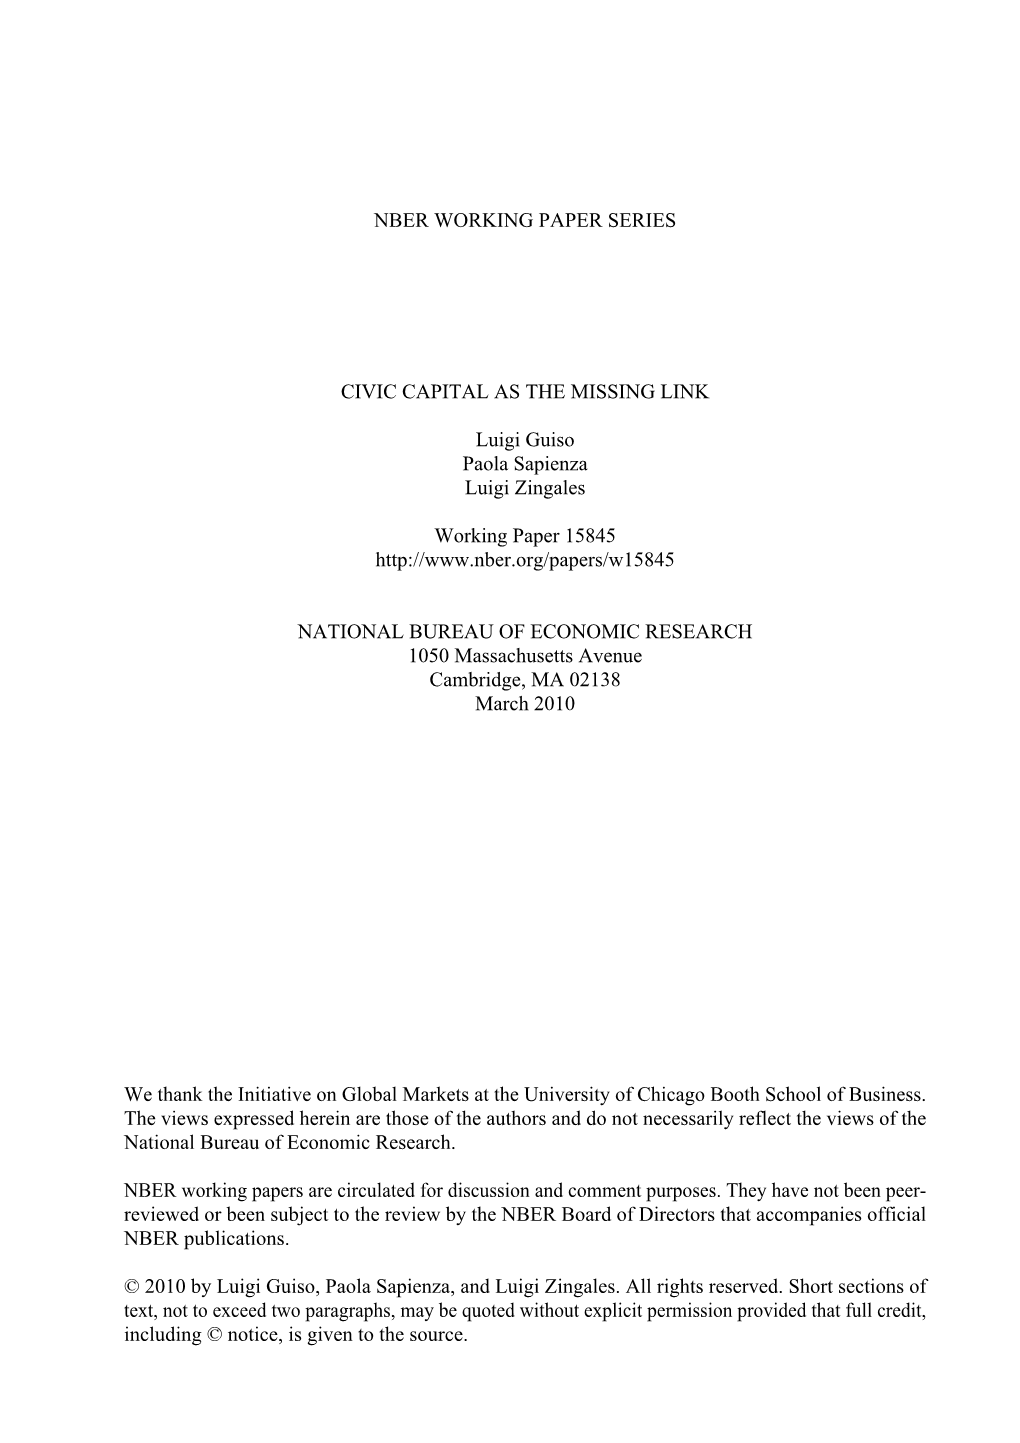 Nber Working Paper Series Civic Capital As the Missing